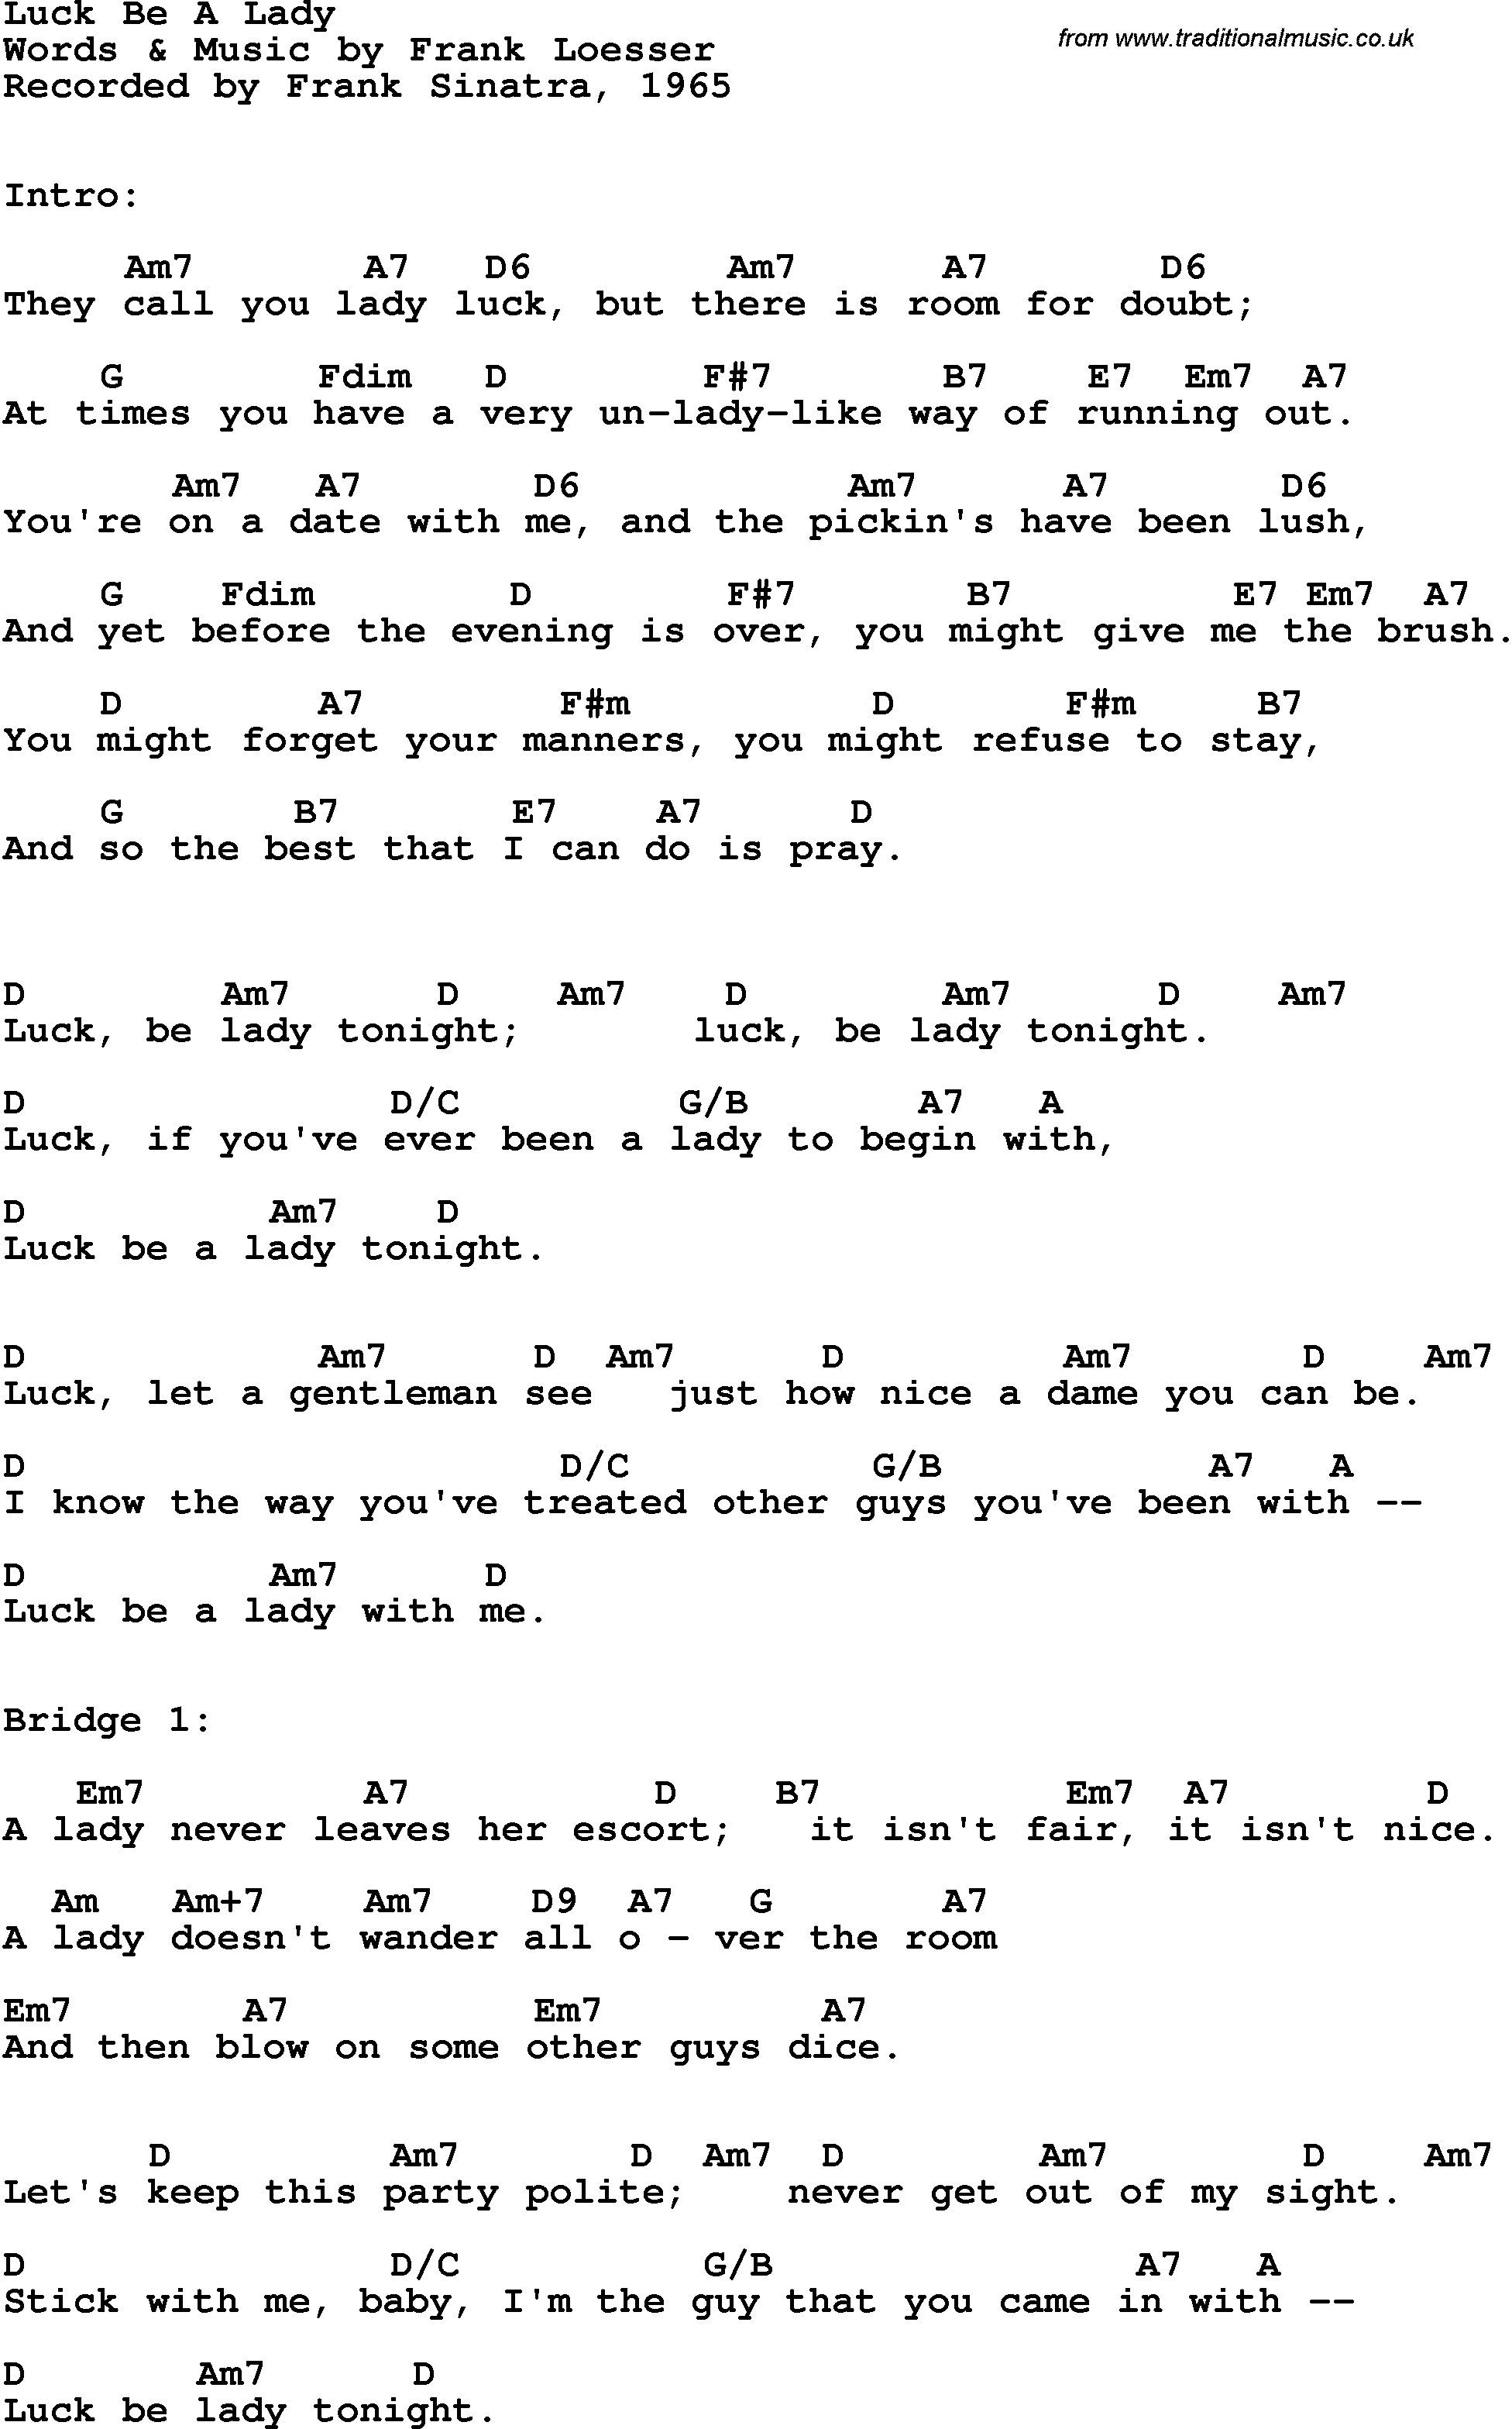 Song Lyrics with guitar chords for Luck Be A Lady - Frank Sinatra, 1965